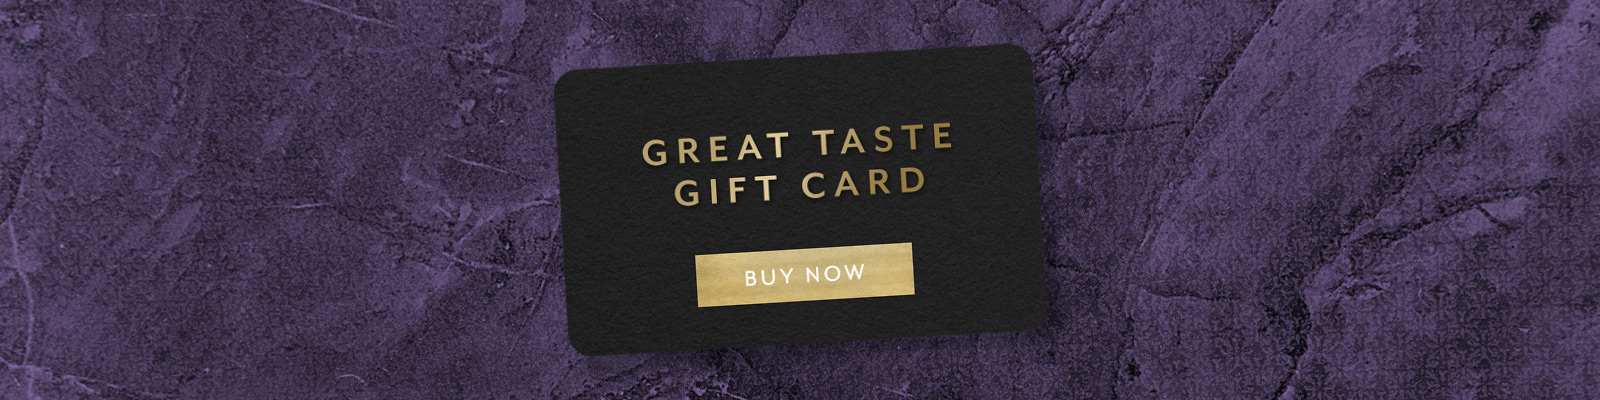 The Cowper Arms Gift Card